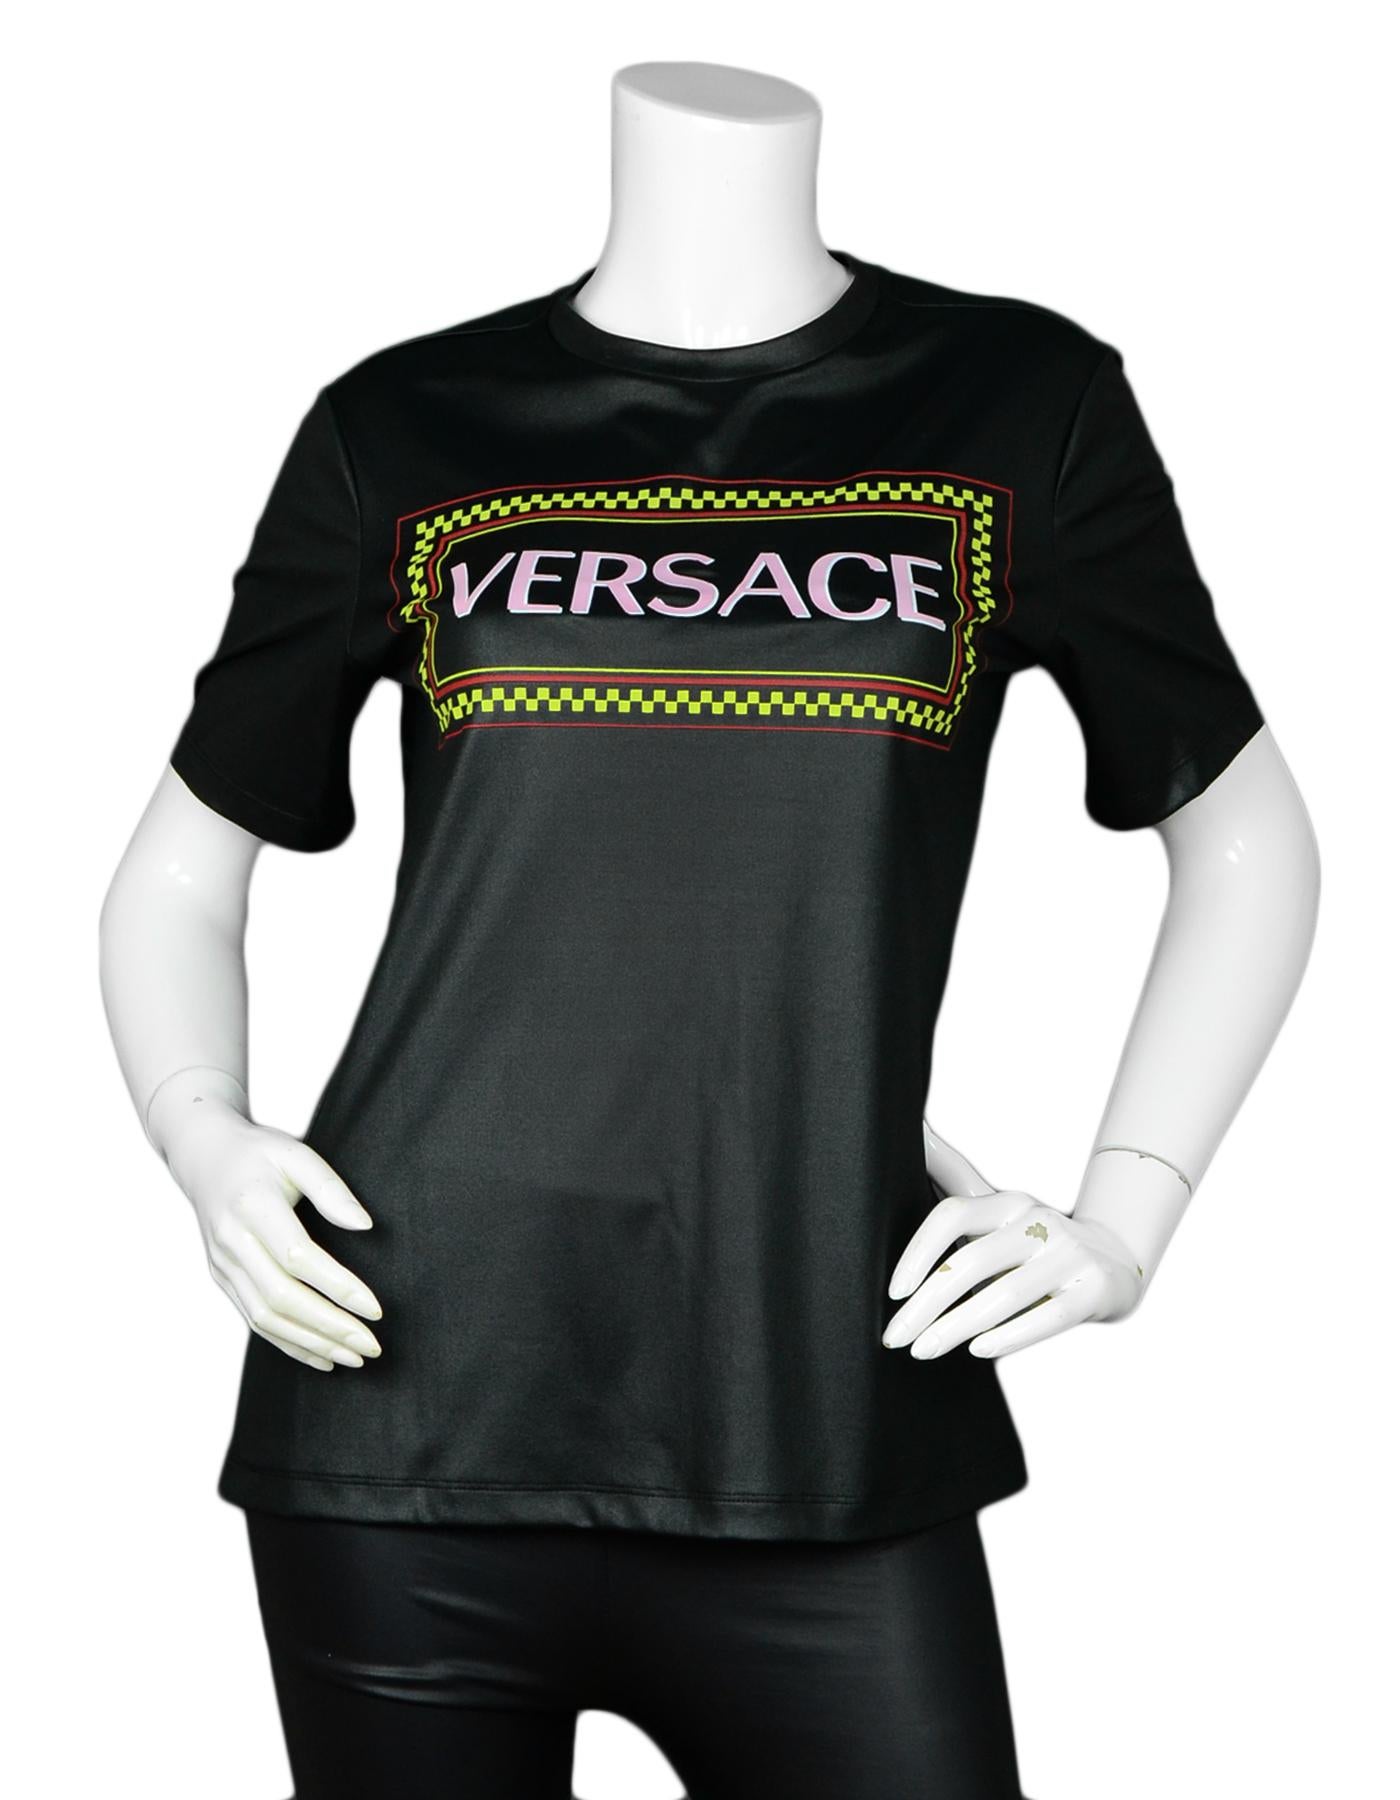 Versace Black Lacquered Jersey 90s Vintage Logo T-Shirt.  Versace's vintage 90s logo as been brought back for this classic style t-shirt.  Black laquered jersey creates a wet look.

Made In: Italy
Year of Production: 2018-2019
Color: Black with wet